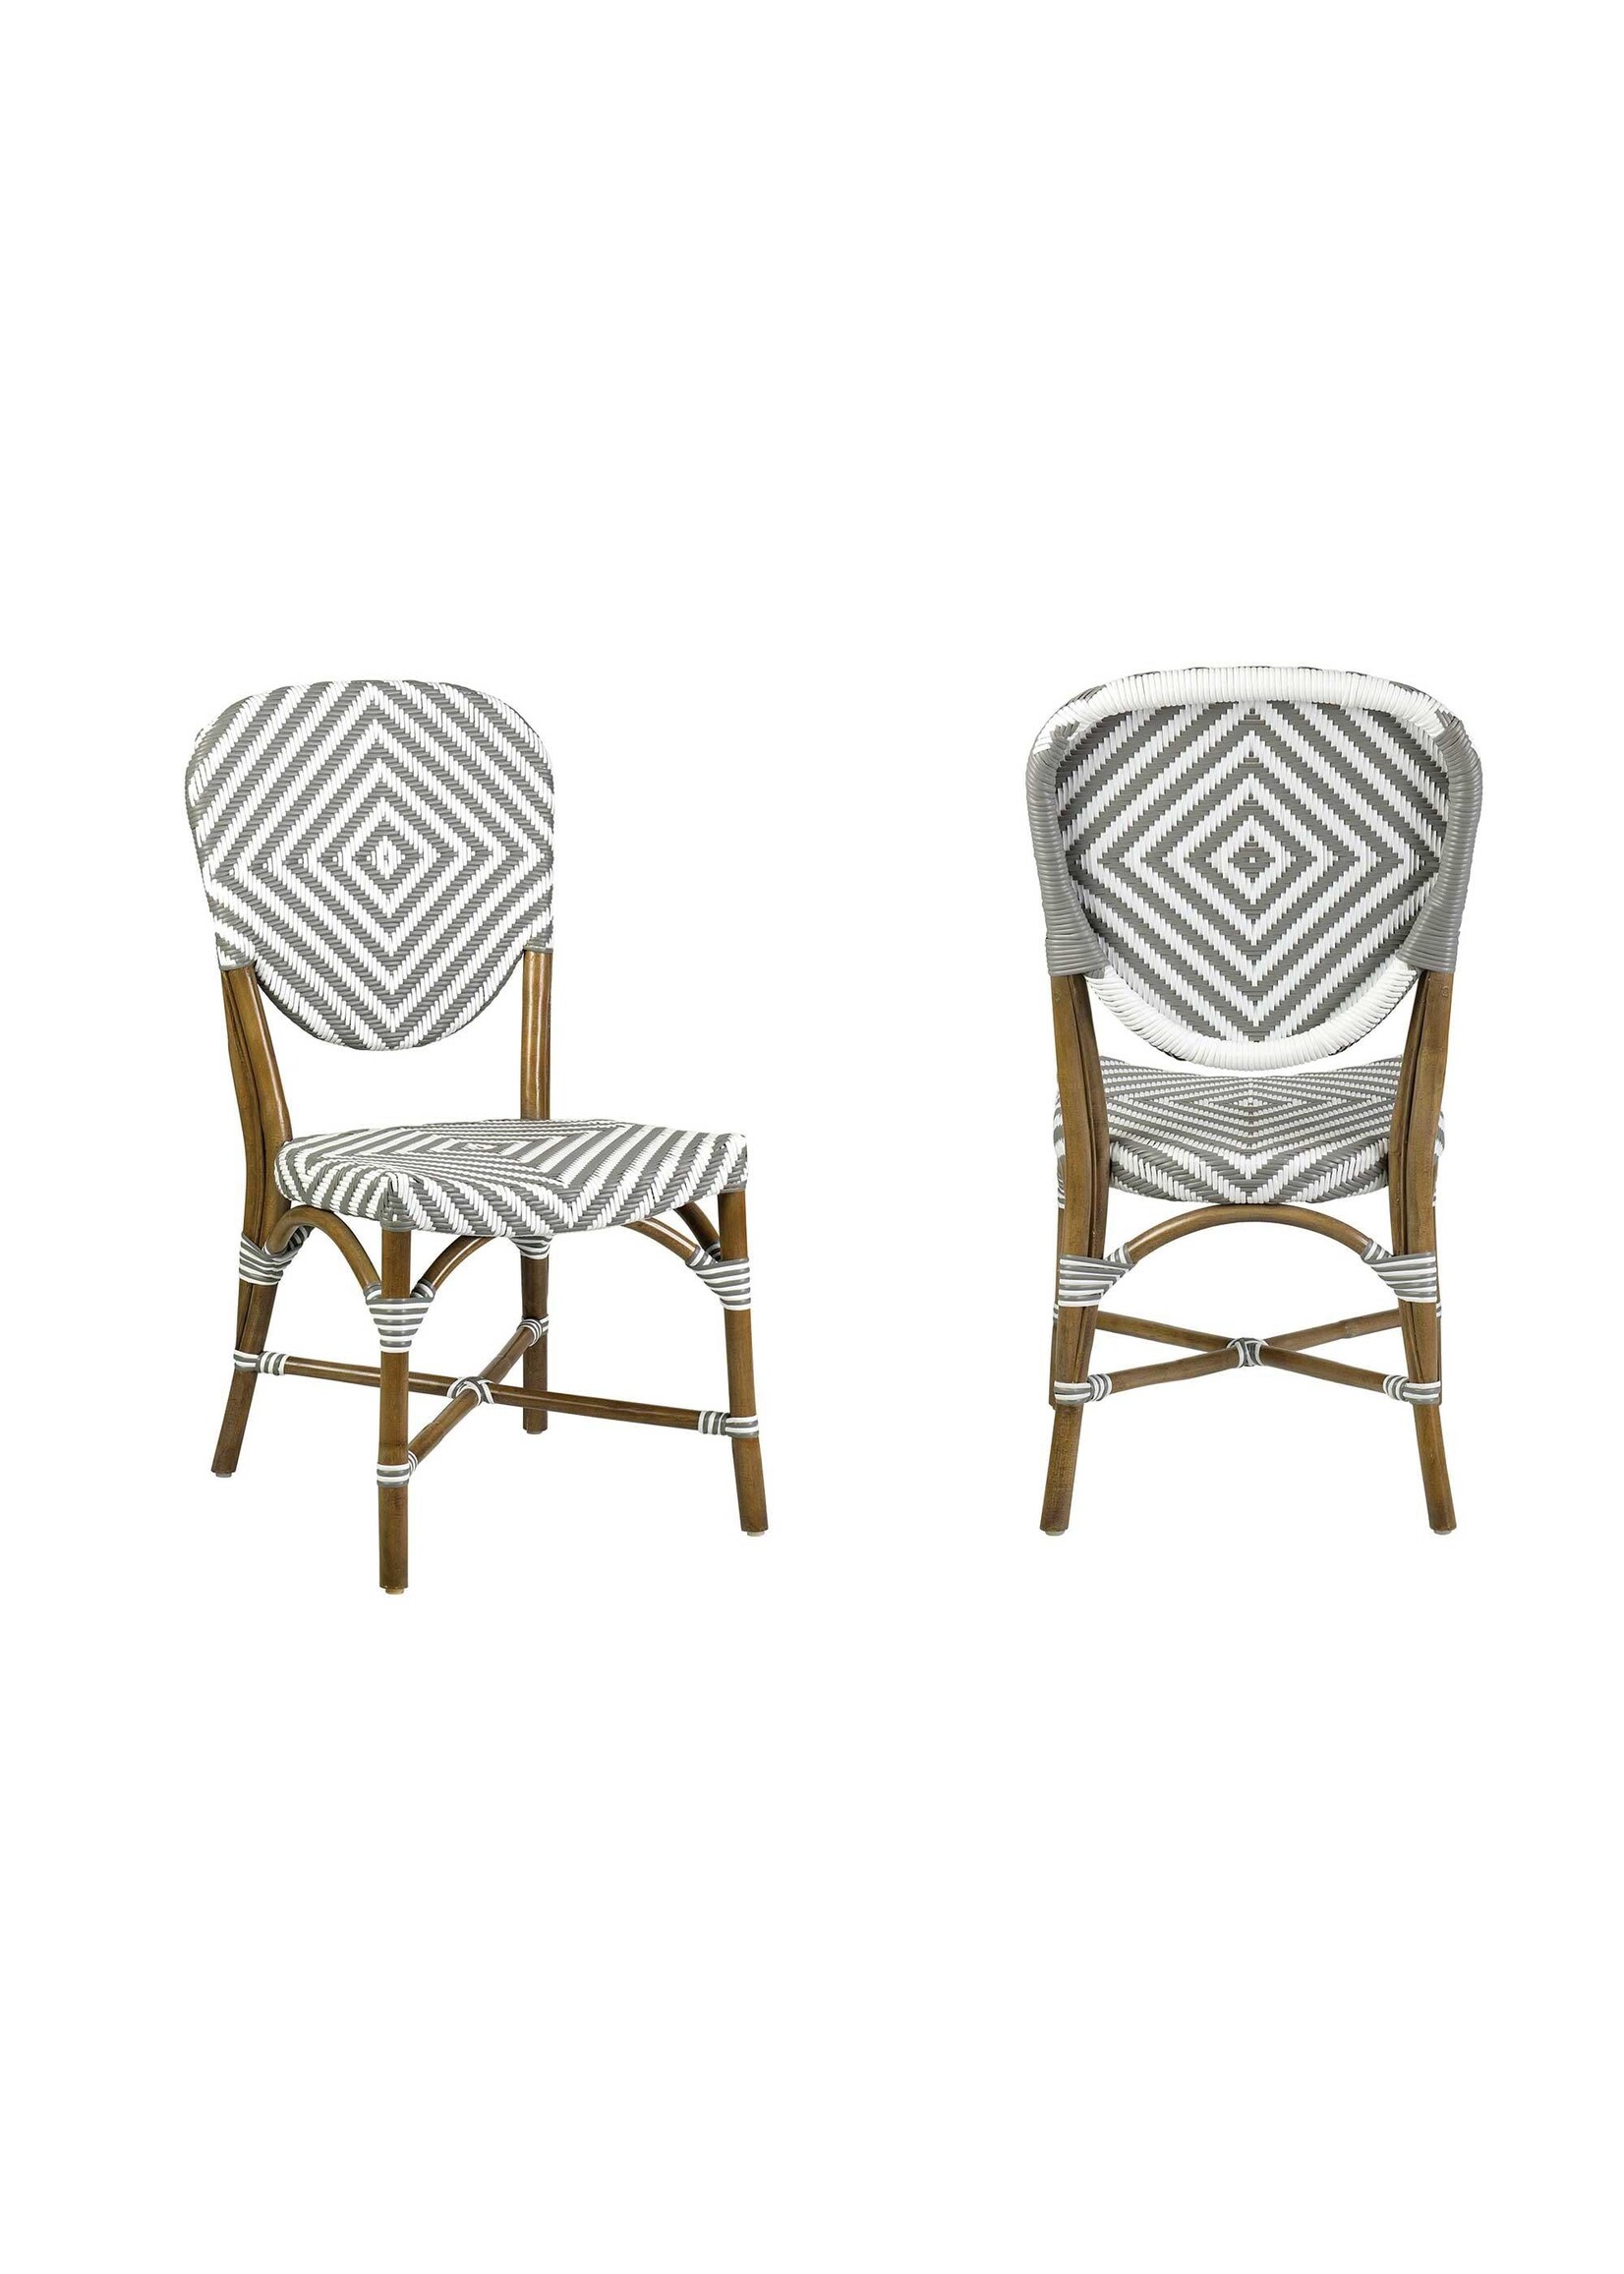 Jeffan Hamlet Bistro Chair with Synthetic Wicker - grey wash- Set of 2 (packaged 2 pcs per box) priced per pair